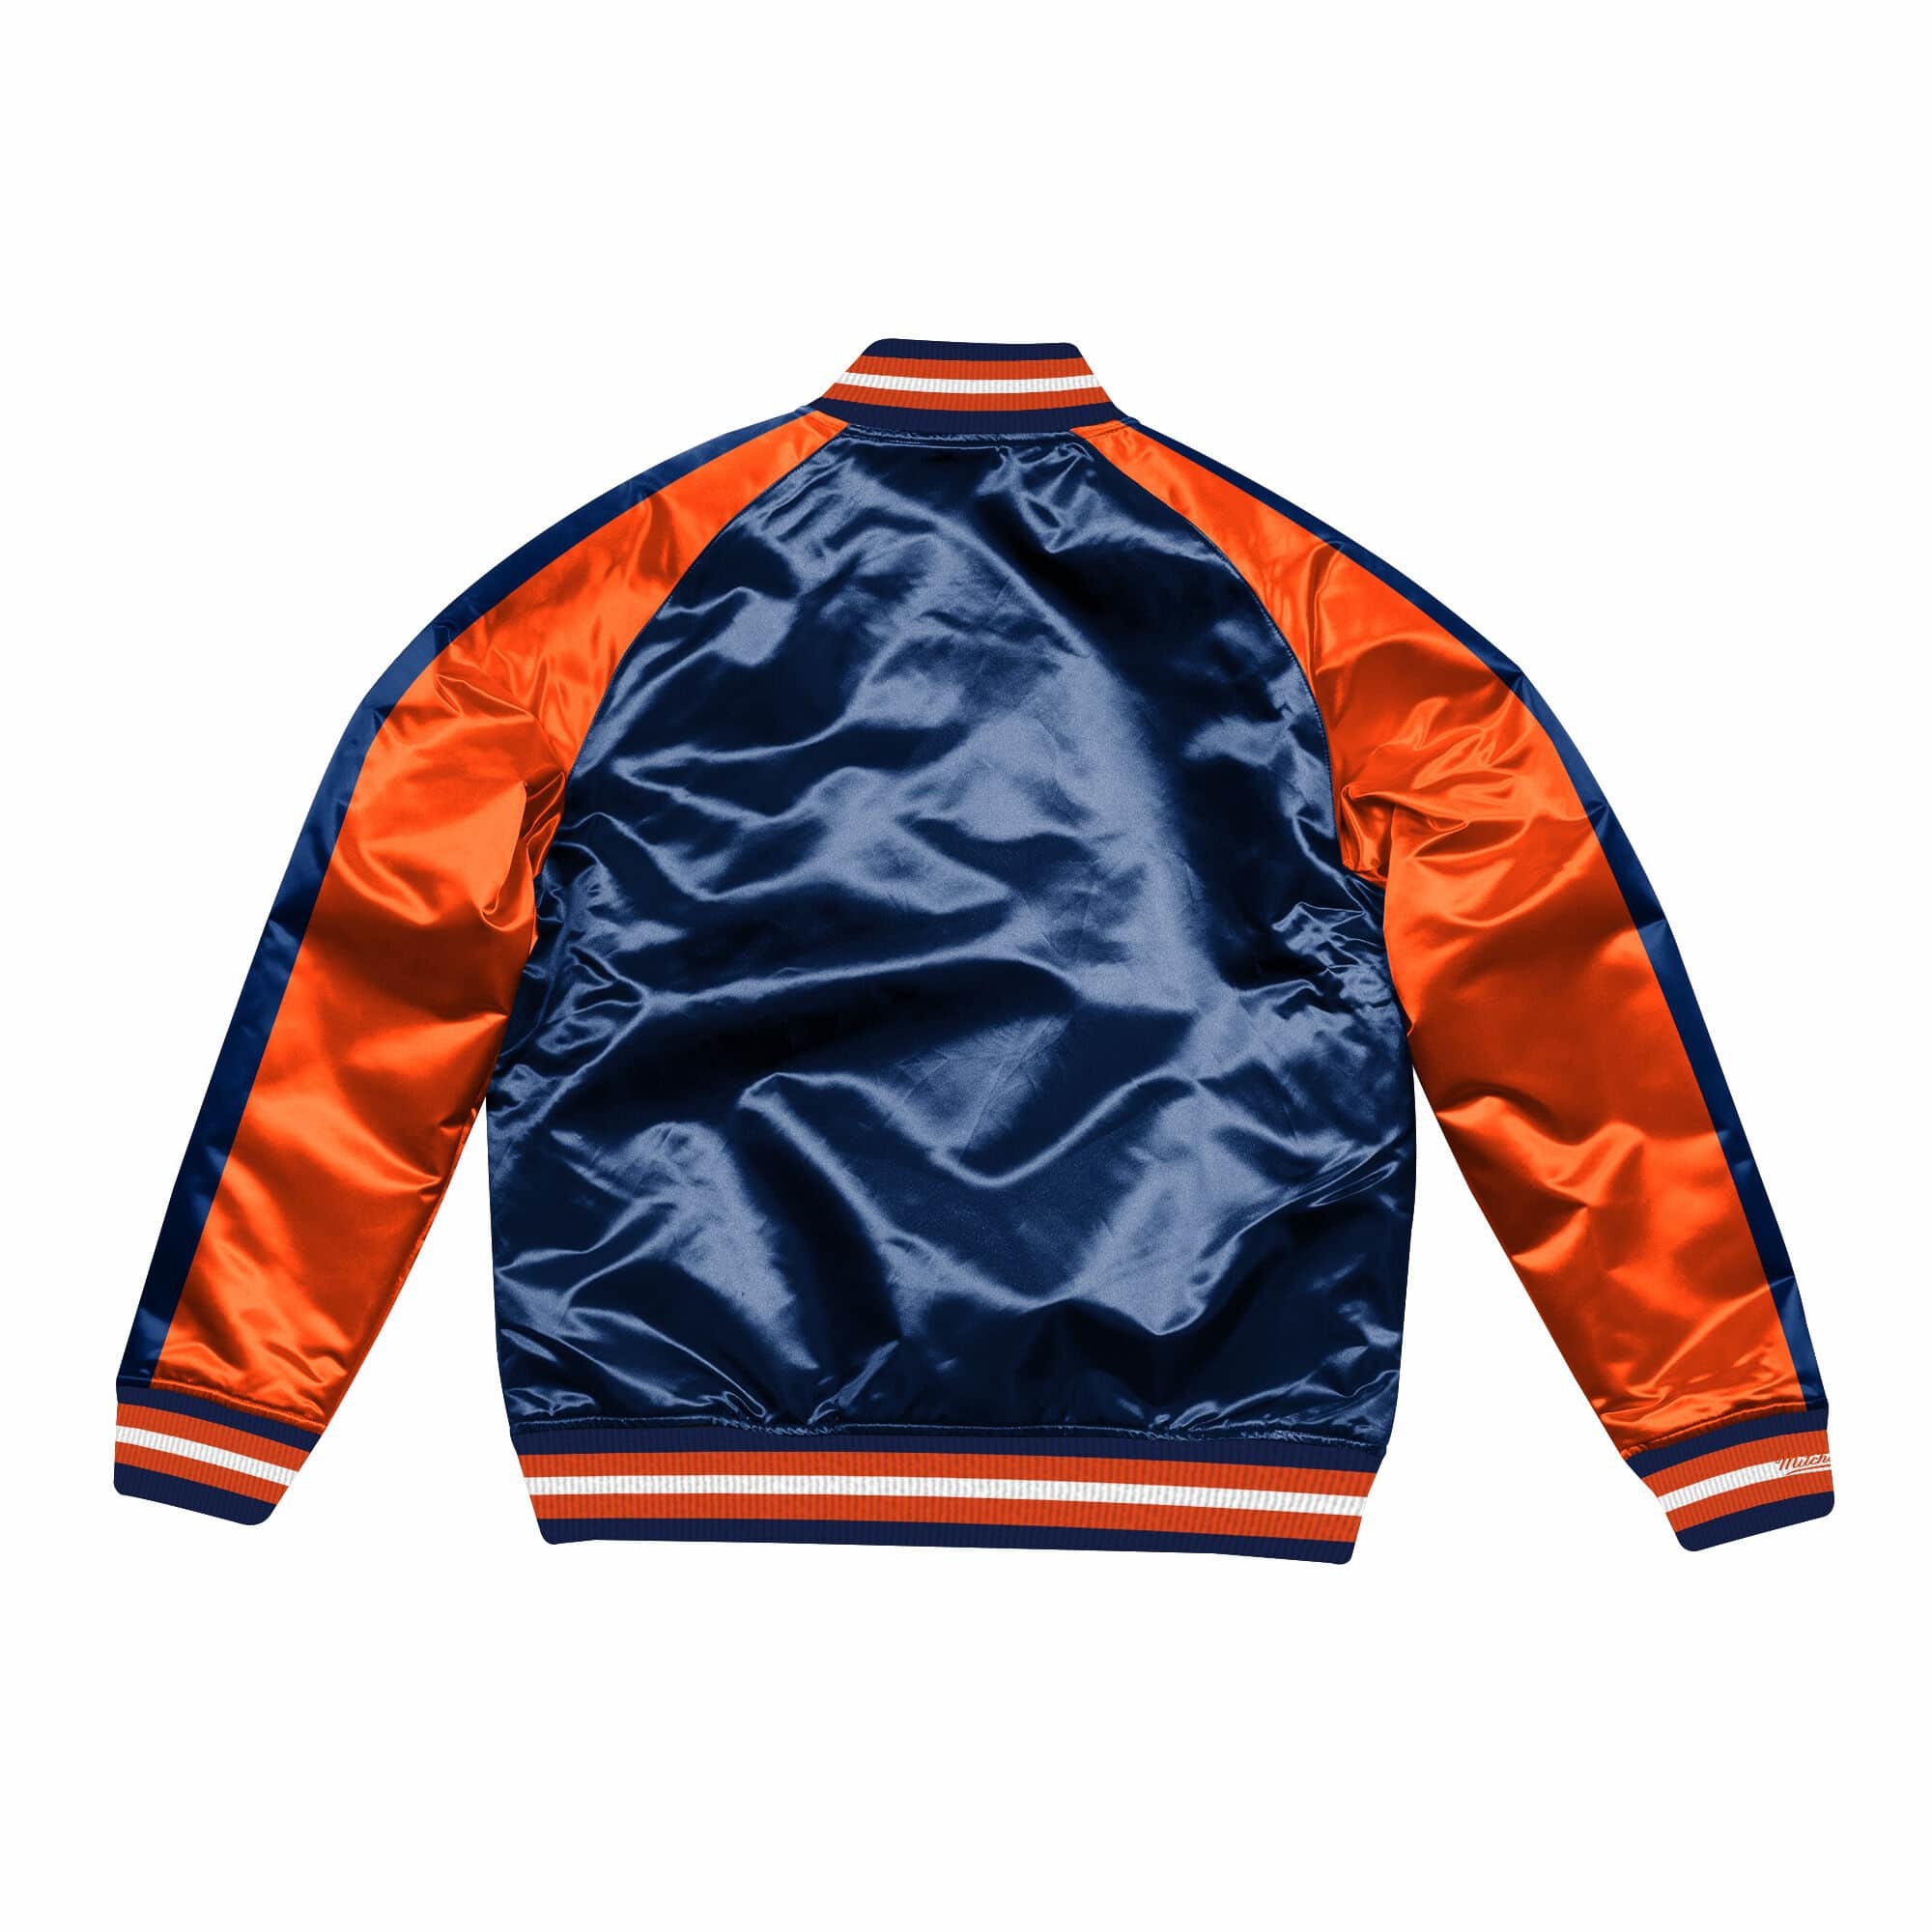 Mitchell & Ness Astros Color Blocked Light Weight Satin Jacket